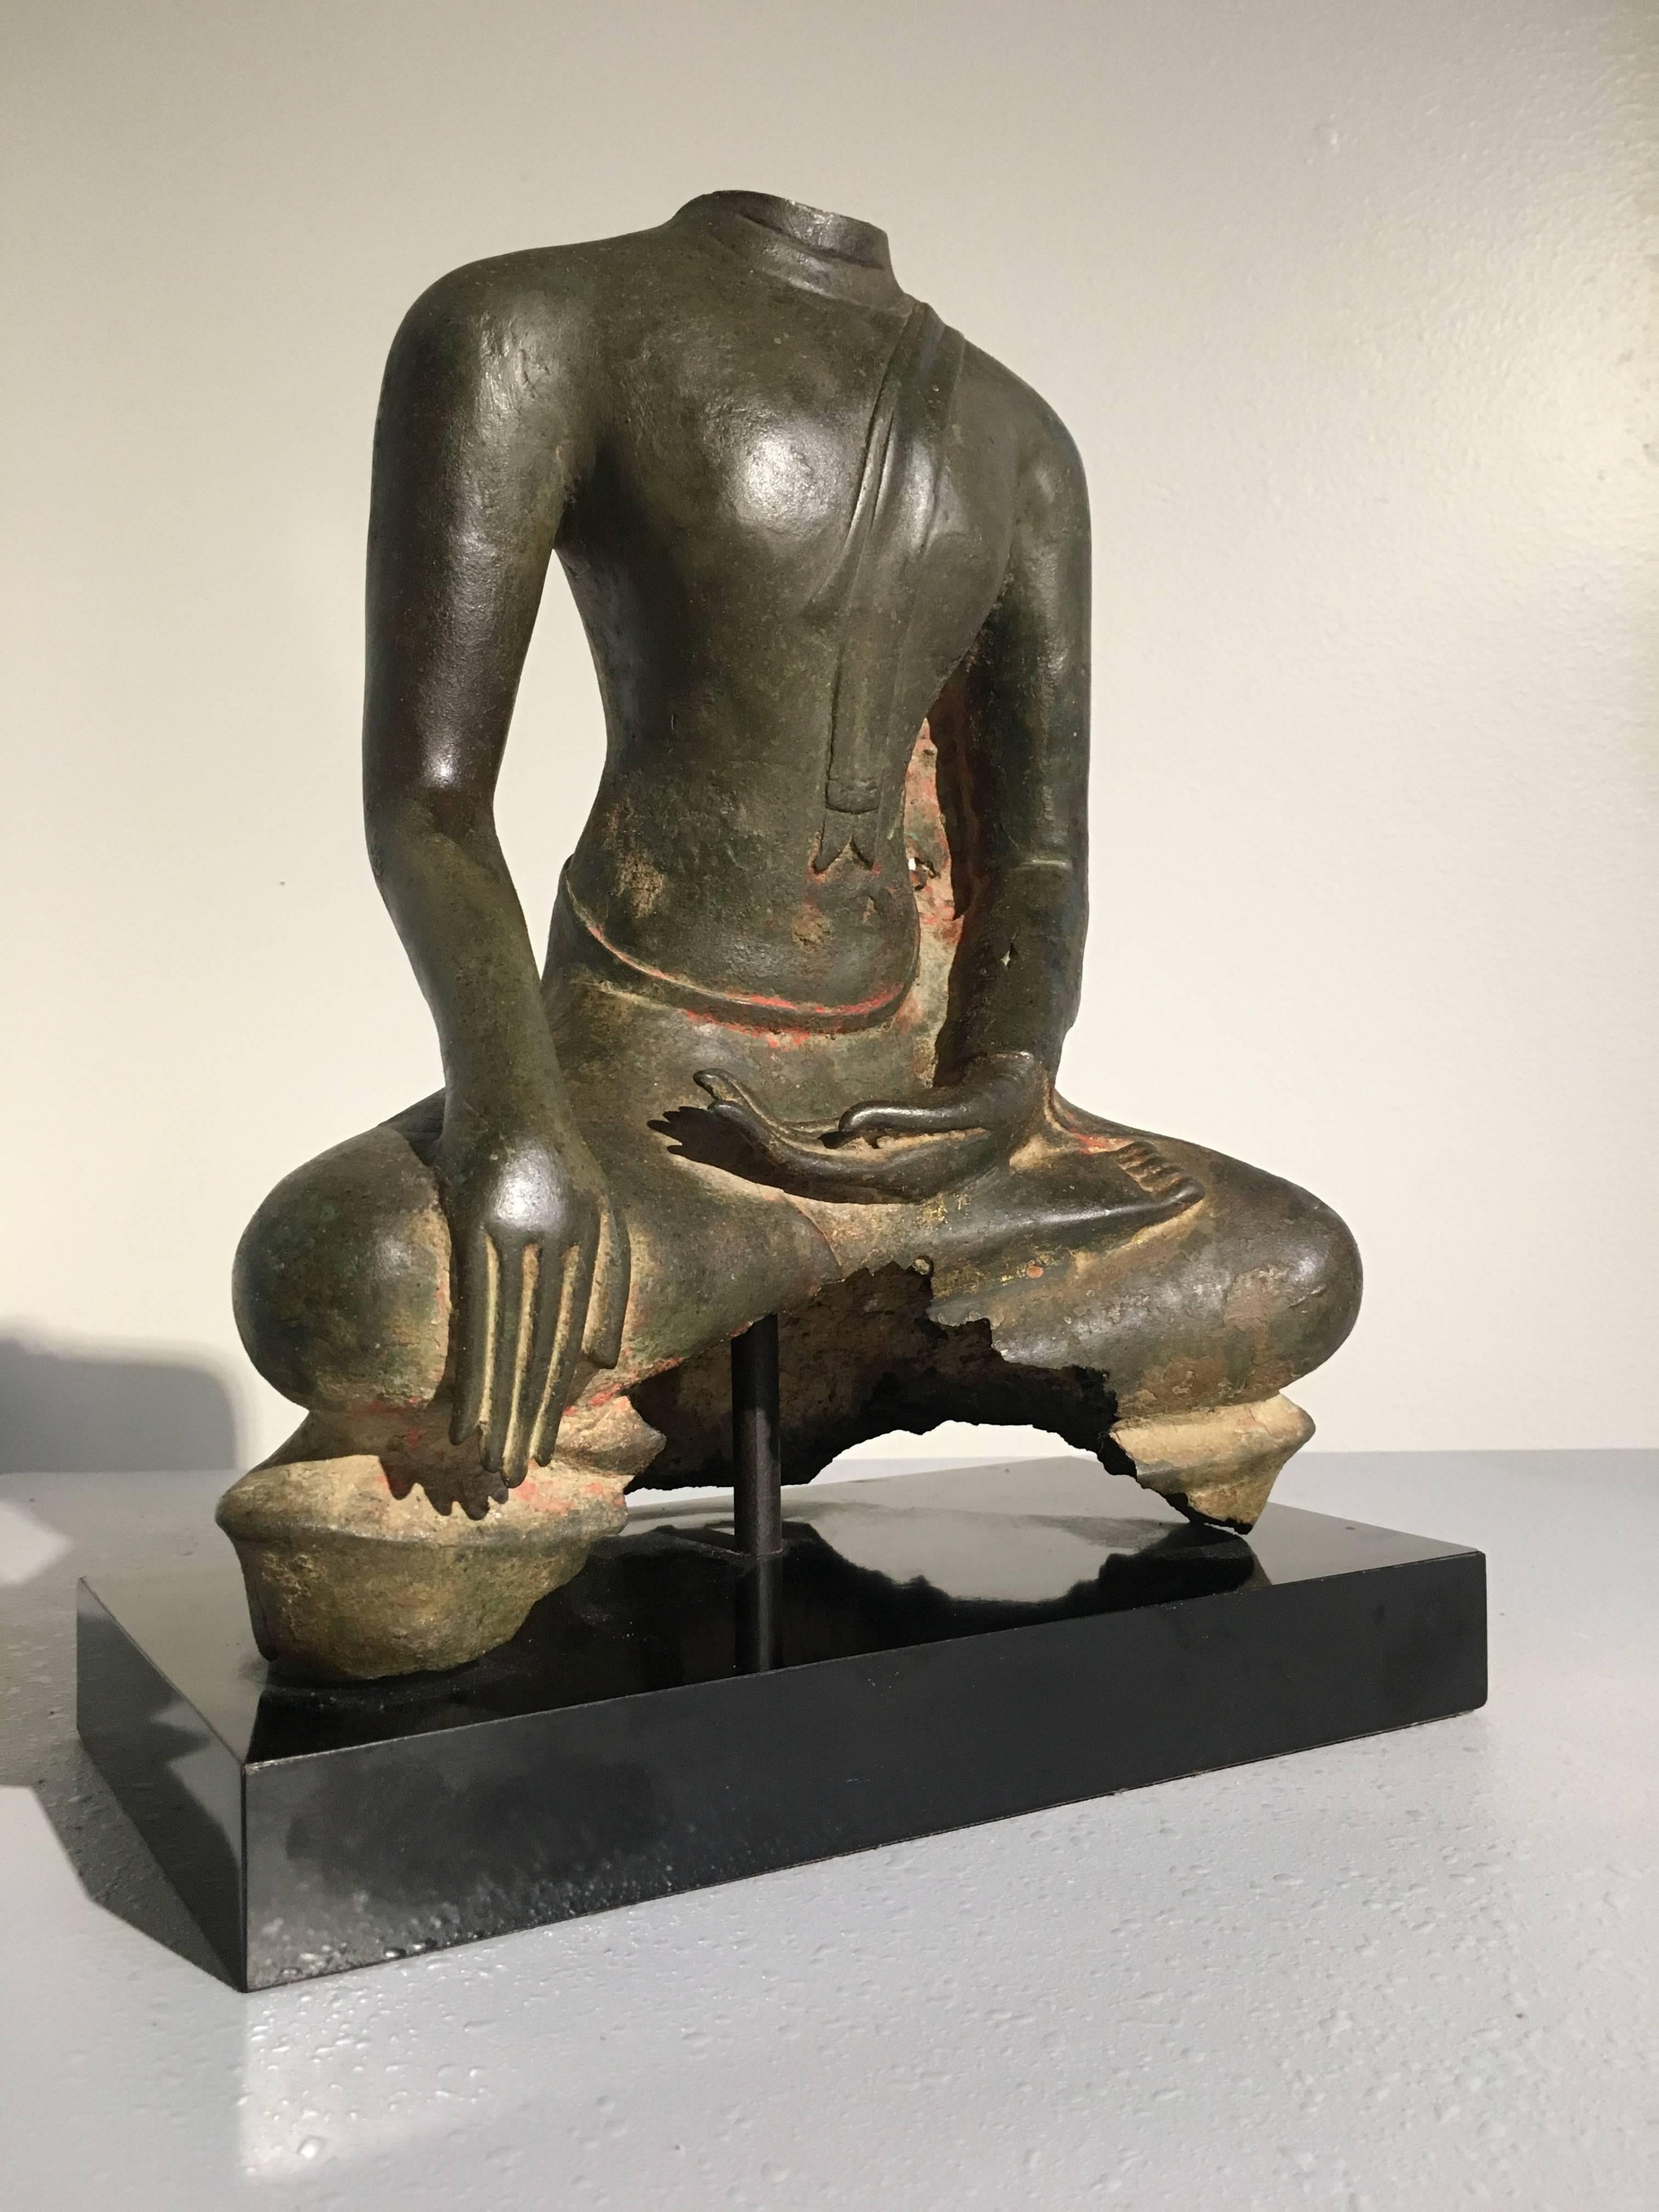 The Buddha is portrayed in a seated position with legs crossed, one hand resting upturned in his lap, the other draped gently over his knee in bhumiparsha mudra, signifying the moment of his enlightenment. He is dressed in simple robes that hug the